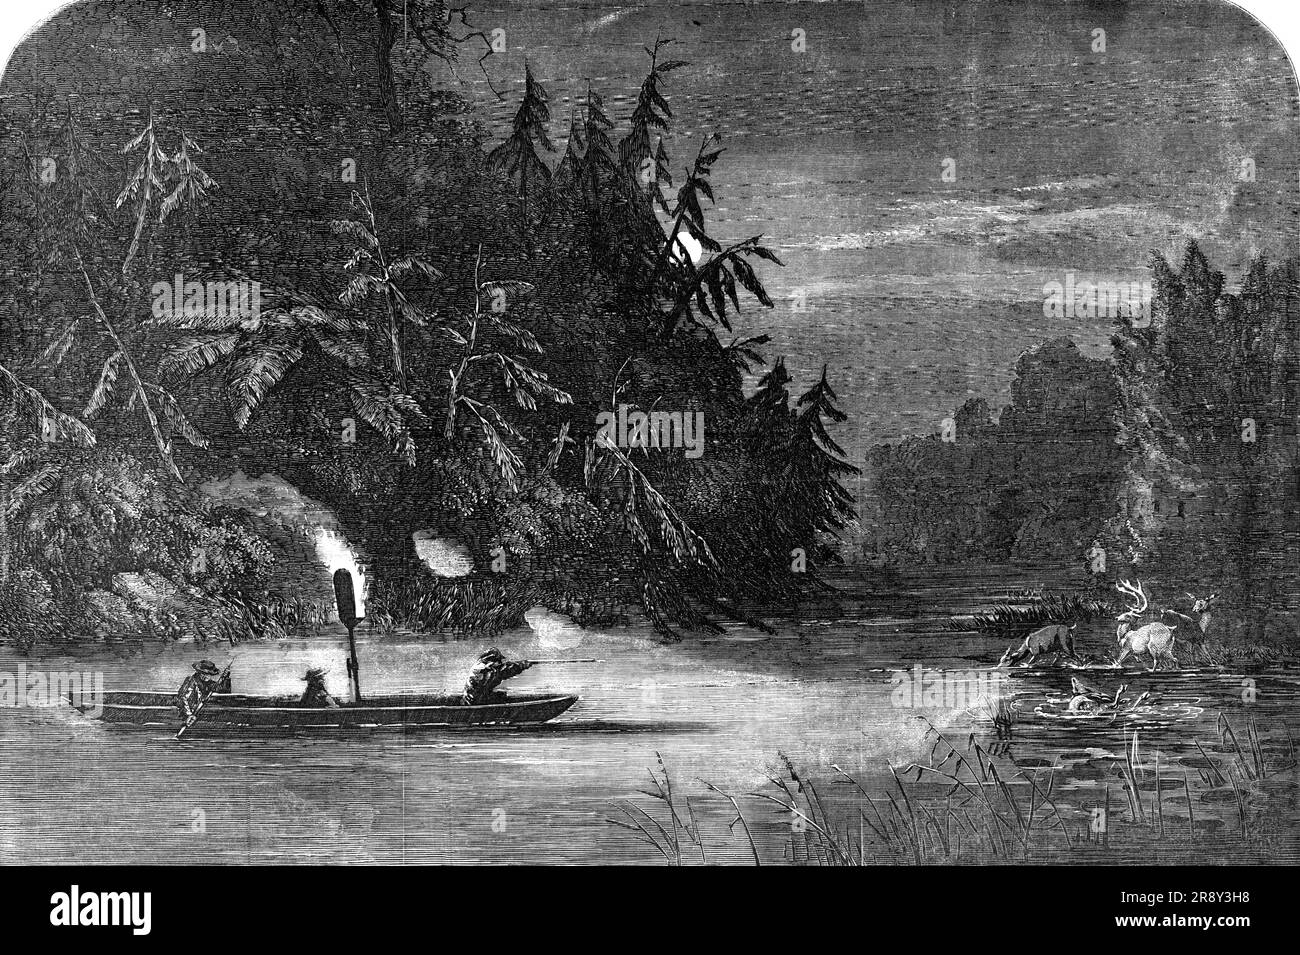 Water-Hunting for Deer: a Night Scene on the River Susquehanna, Pennsylvania, 1857. 'Another instance of the revolver principle applied to the rifle is in what is called &quot;water hunting&quot; in that part of North America in which Mr. Catlin [the celebrated American explorer and sportsman] describes himself as having been &quot;raised.&quot; In the warm nights of summer the deer come down to the rivers to bathe and feed on the aquatic plants. The difficulty with the ordinary rifle was that only one shot could be got, as, from their rapidity and shyness, they are out of sight in a moment. M Stock Photo